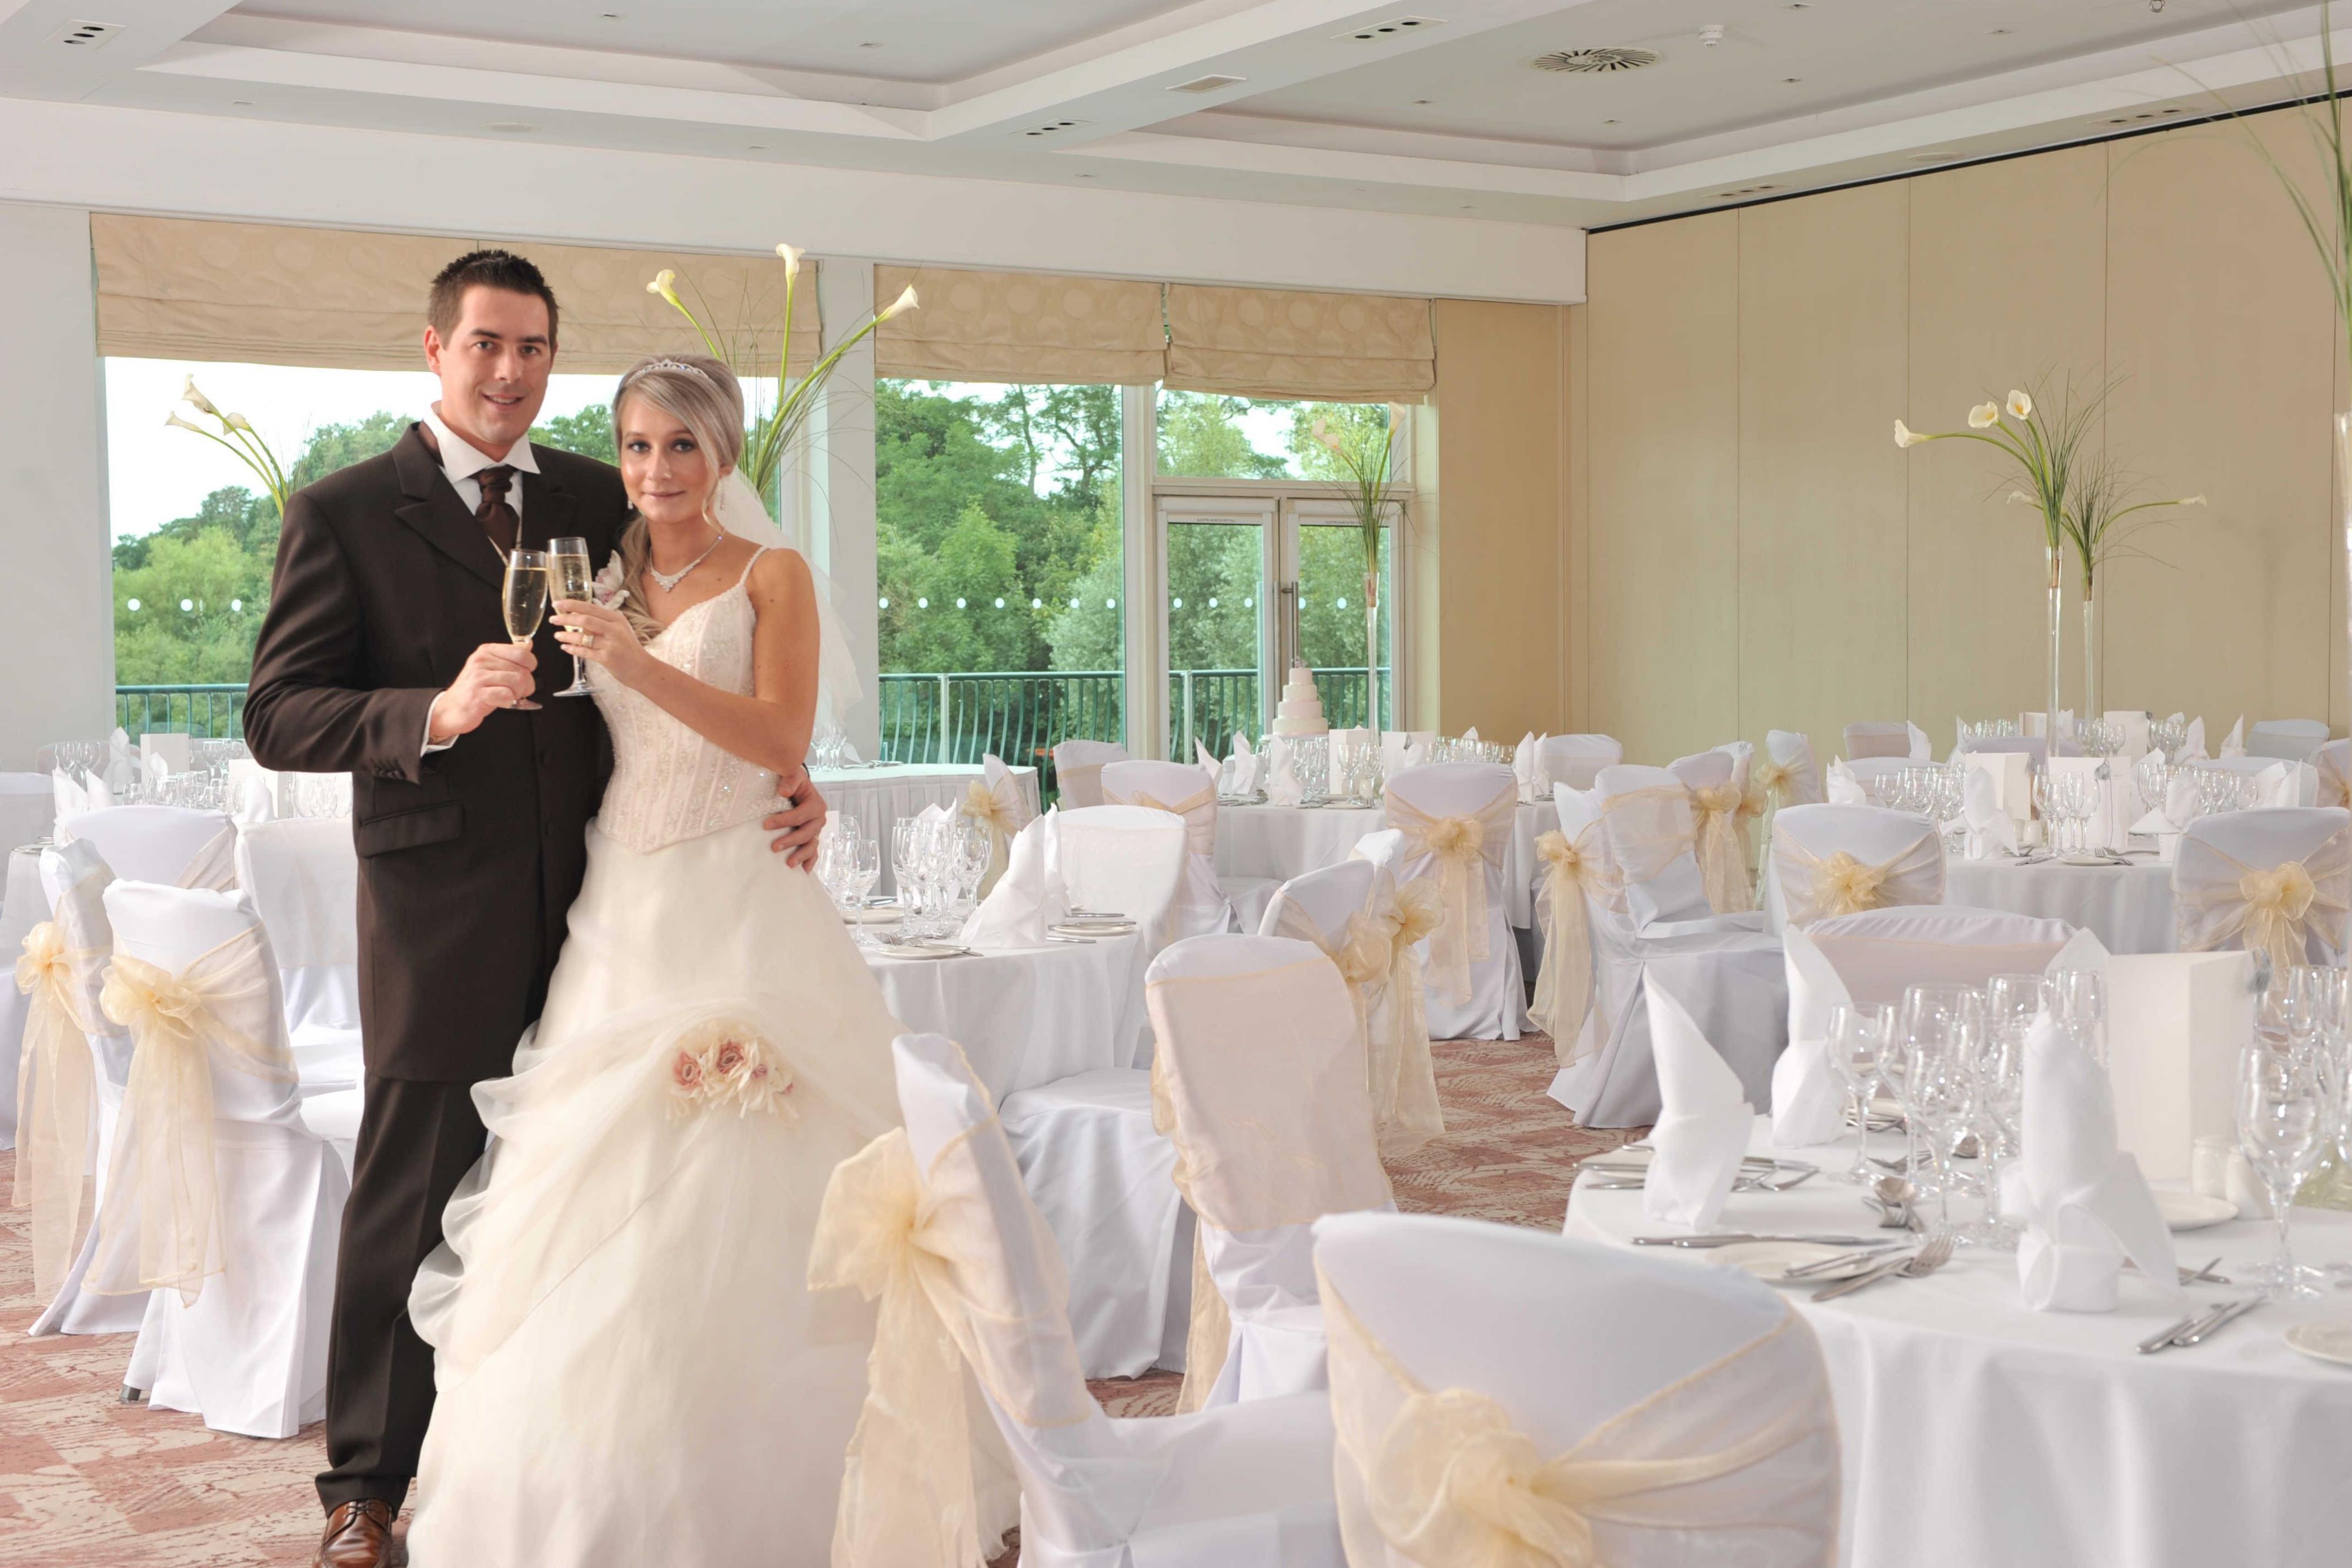 Winterlake Suite - perfect for wedding receptions